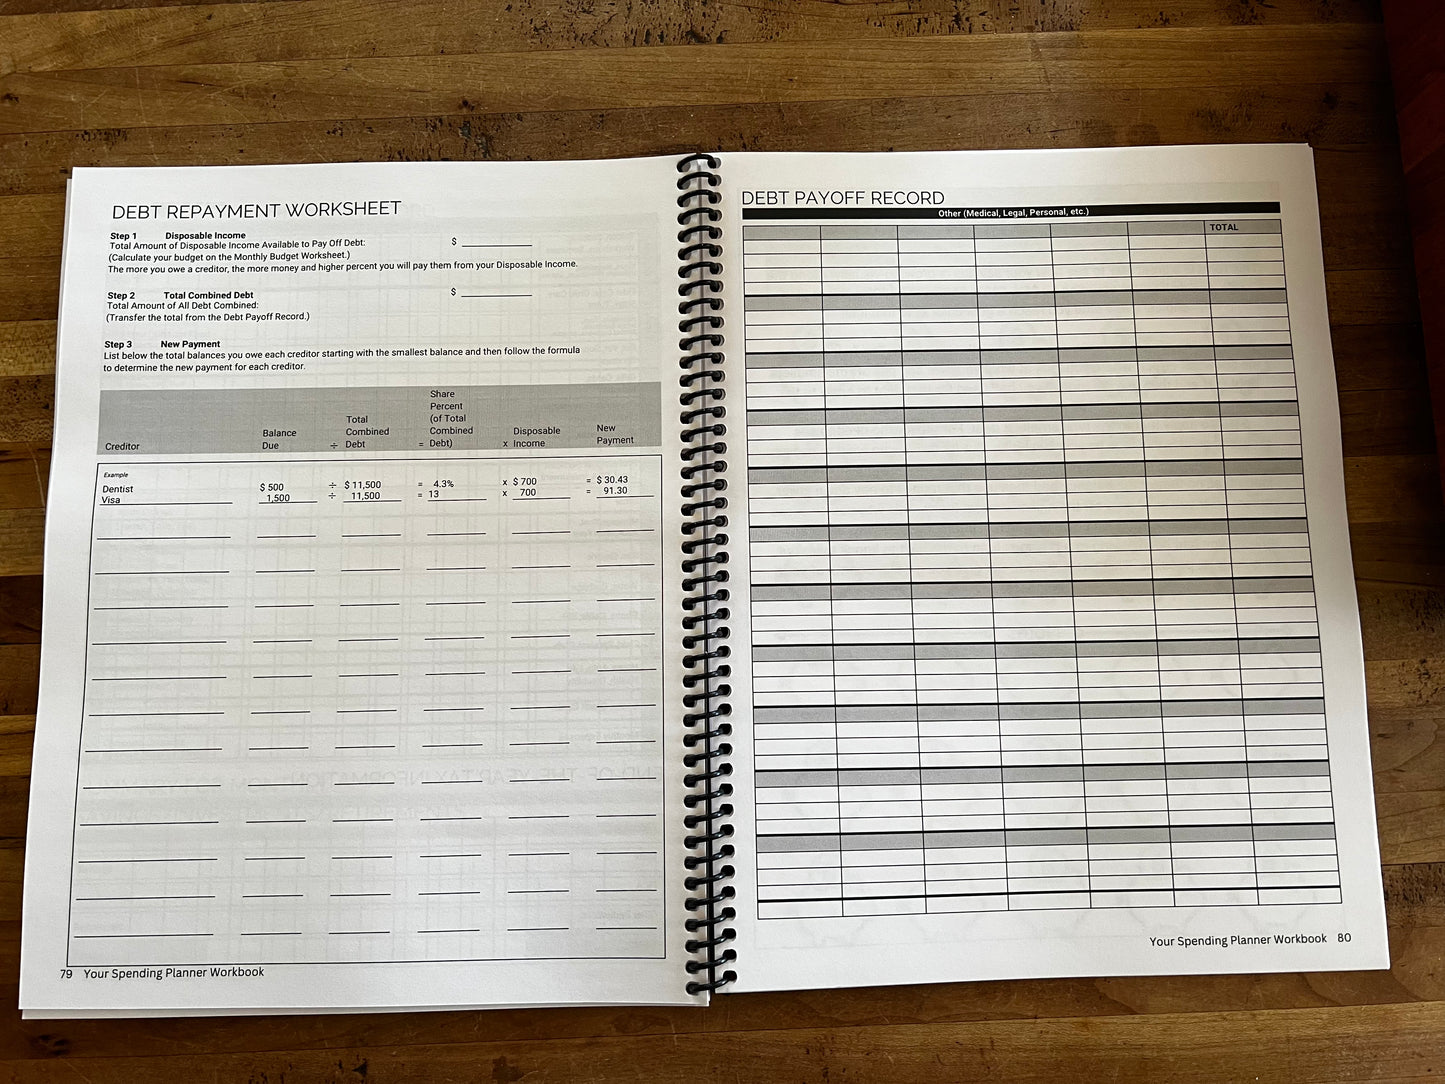 Finances and... Your Spending Planner Workbook